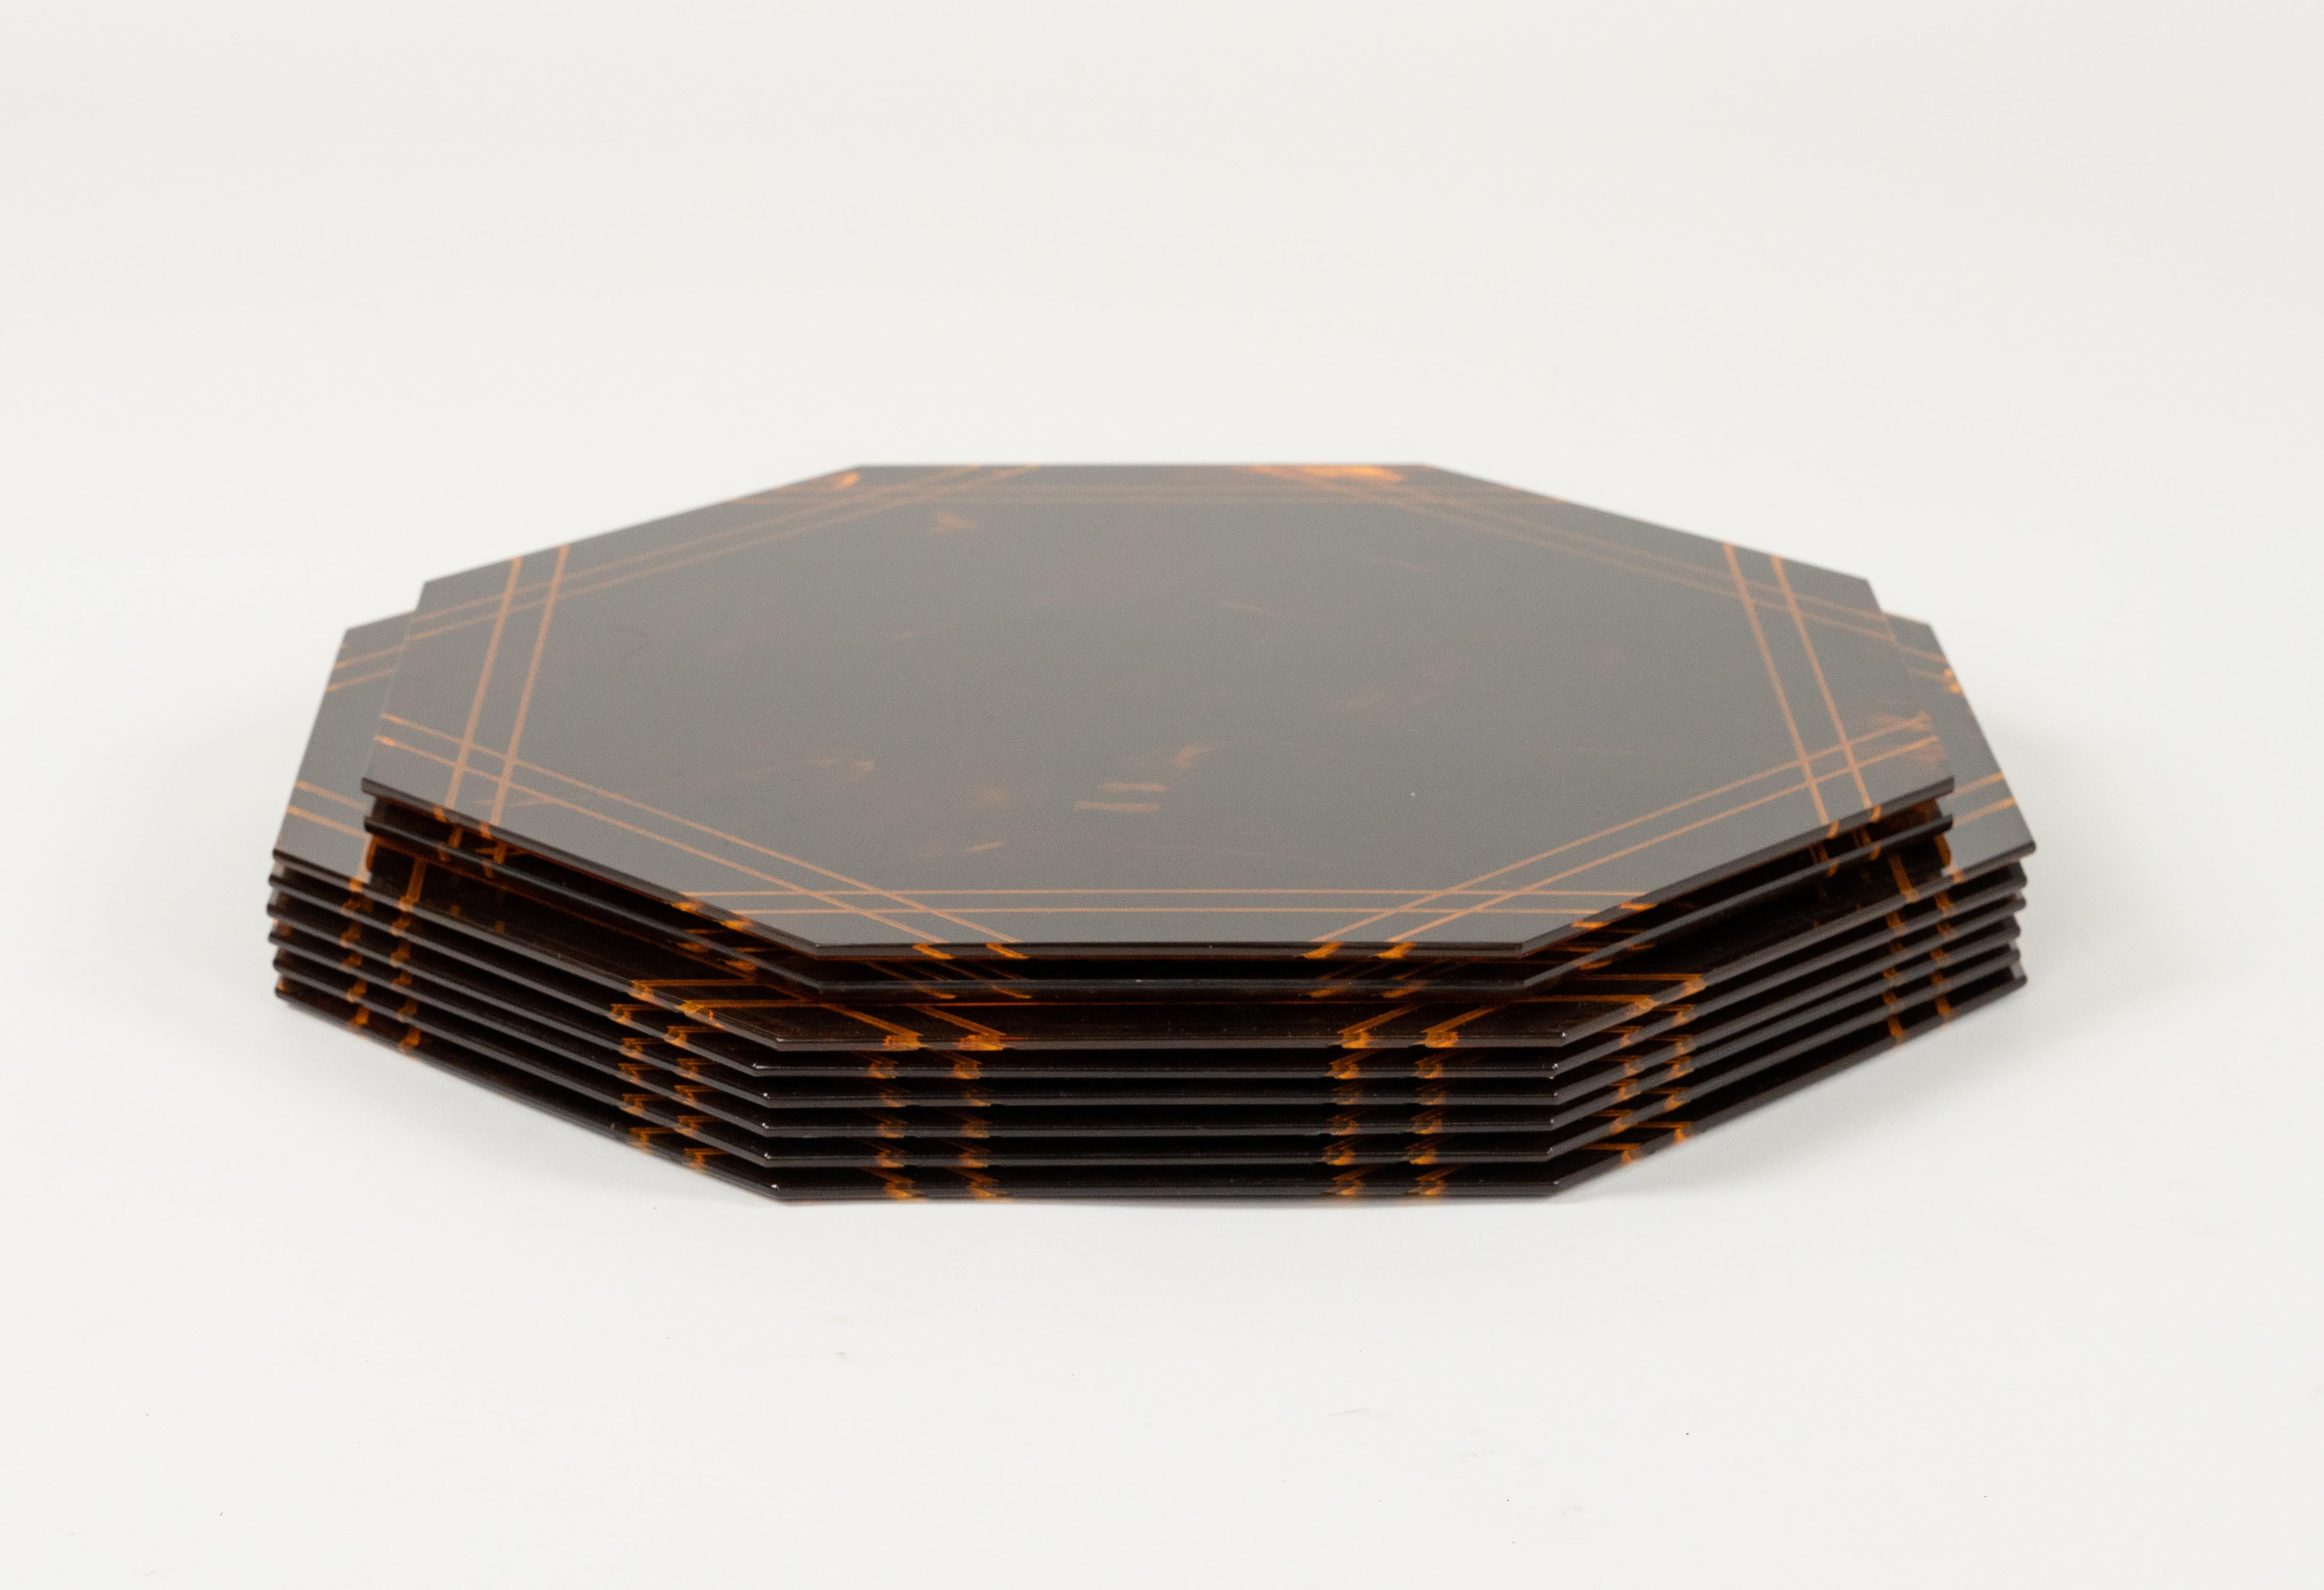 Set of Eight Placemats Tortoiseshell Effect Lucite by Team Guzzini, Italy 1970s For Sale 5